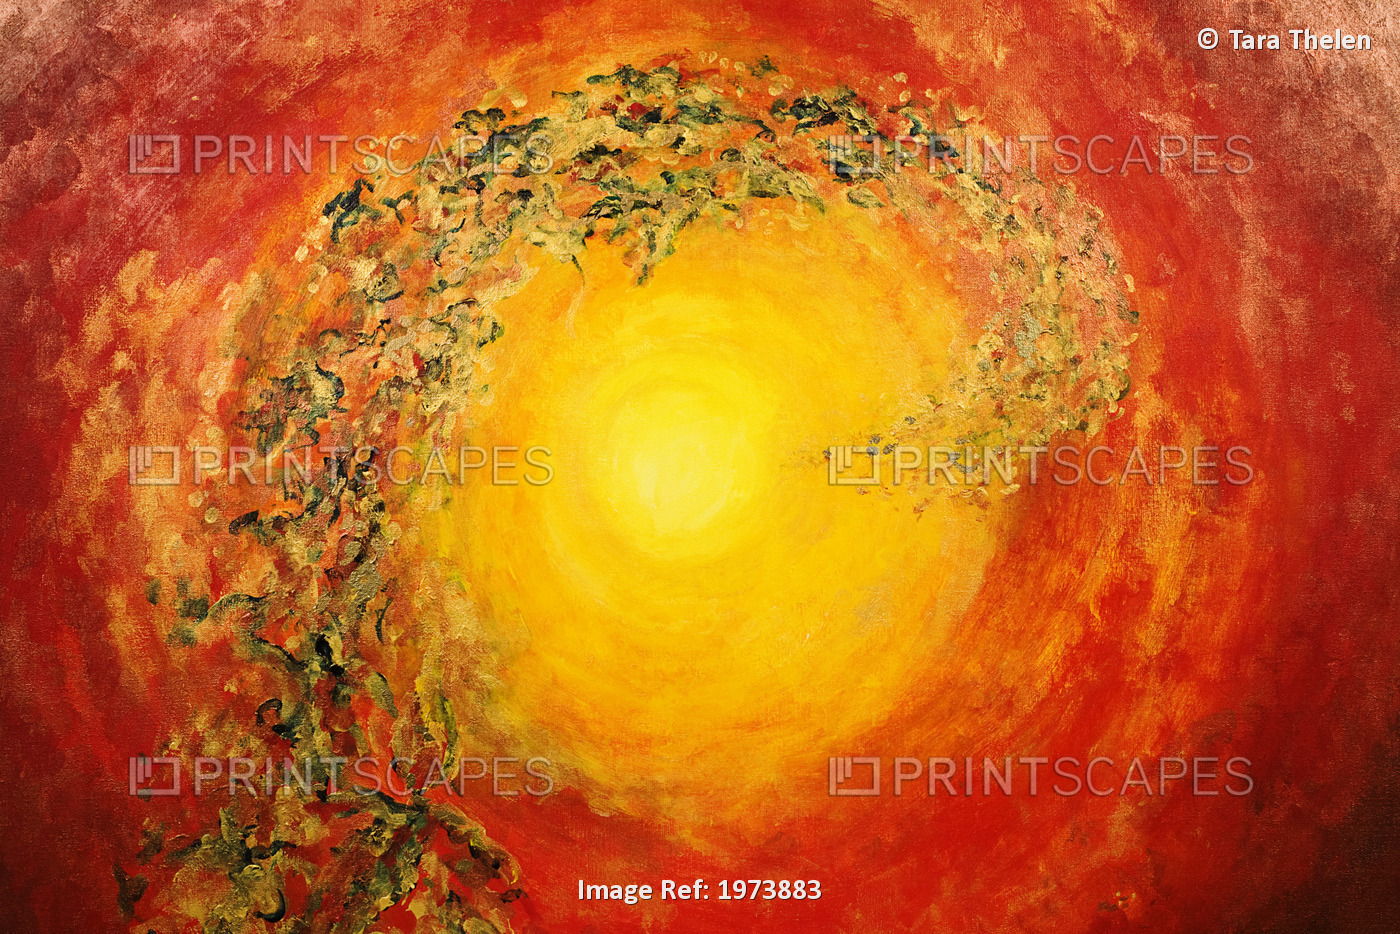 Ascending Light, Abstract Of Cosmic Spiral / Vortex, Energetic And Vibrant ...